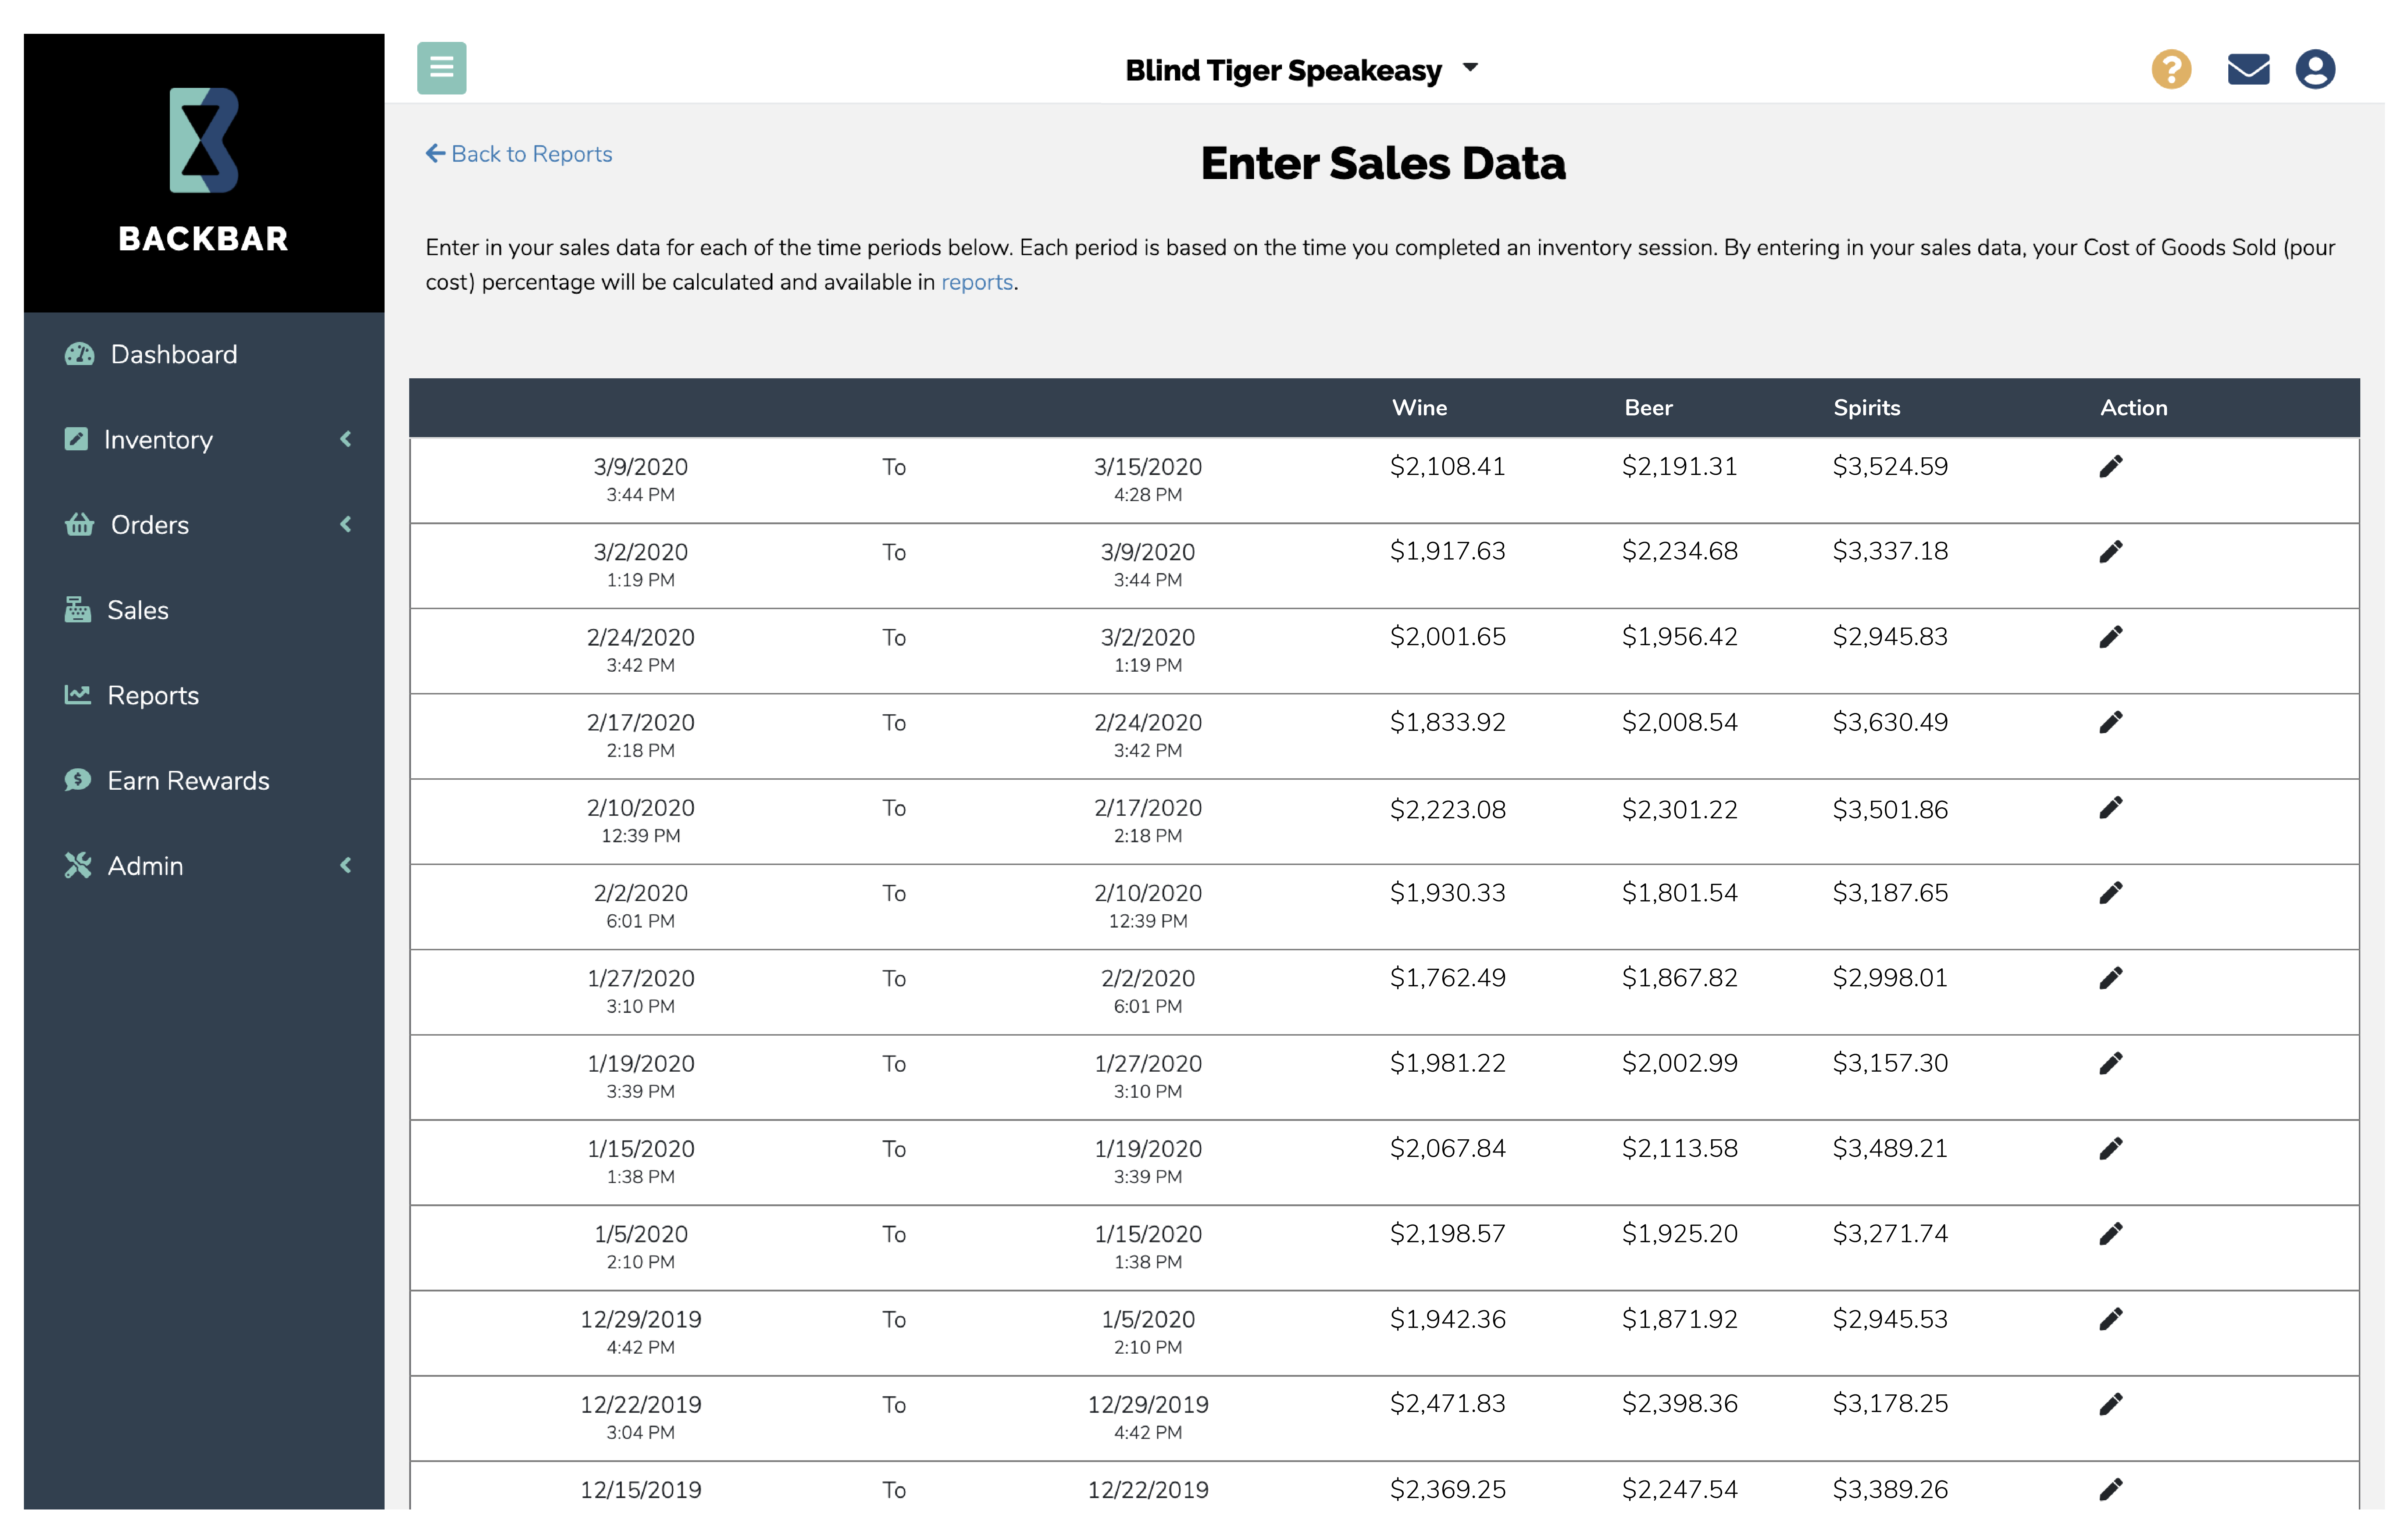 Enter Sales Data Page